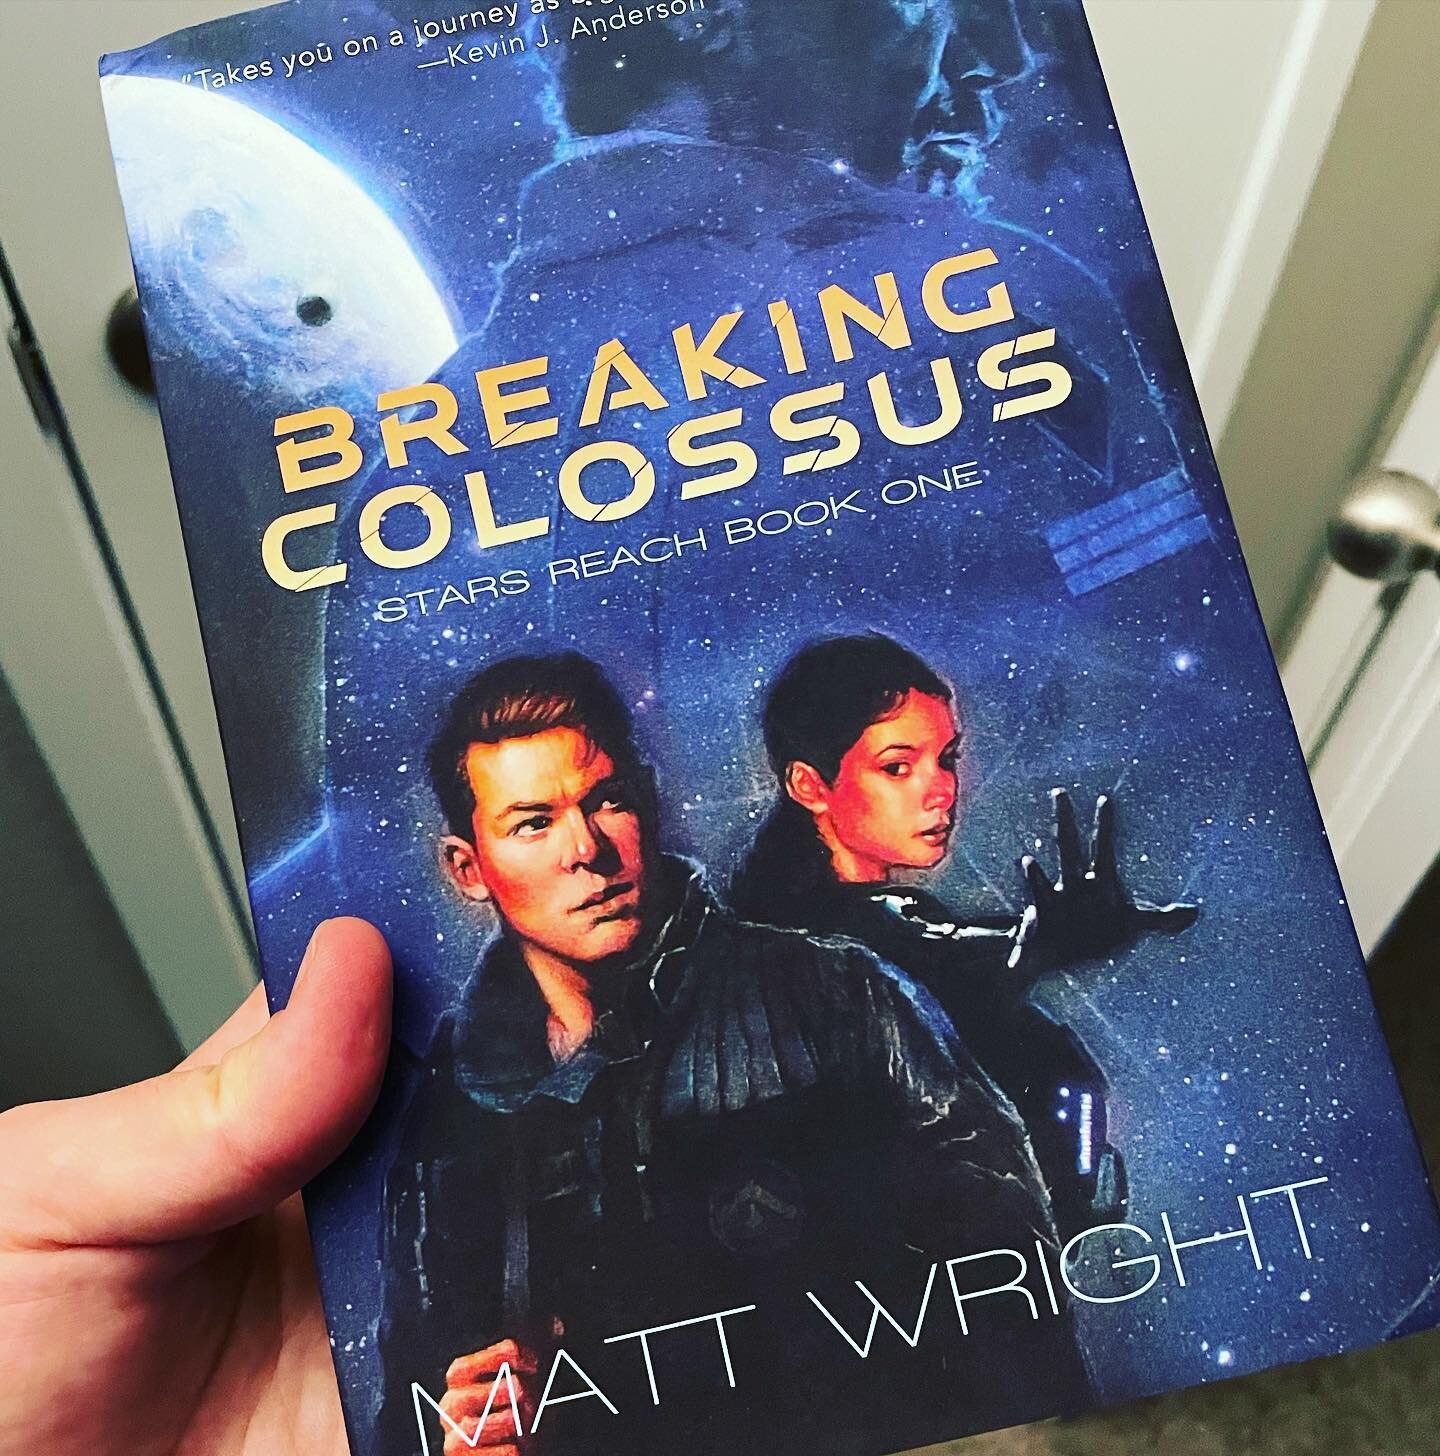 Finally got my hands on this beautiful copy of Breaking Colossus by my friend and fellow Space Opera author Matt Wright. I had the honor of being able to read this in advance and can honestly say it&rsquo;s one of the best space adventures I&rsquo;ve